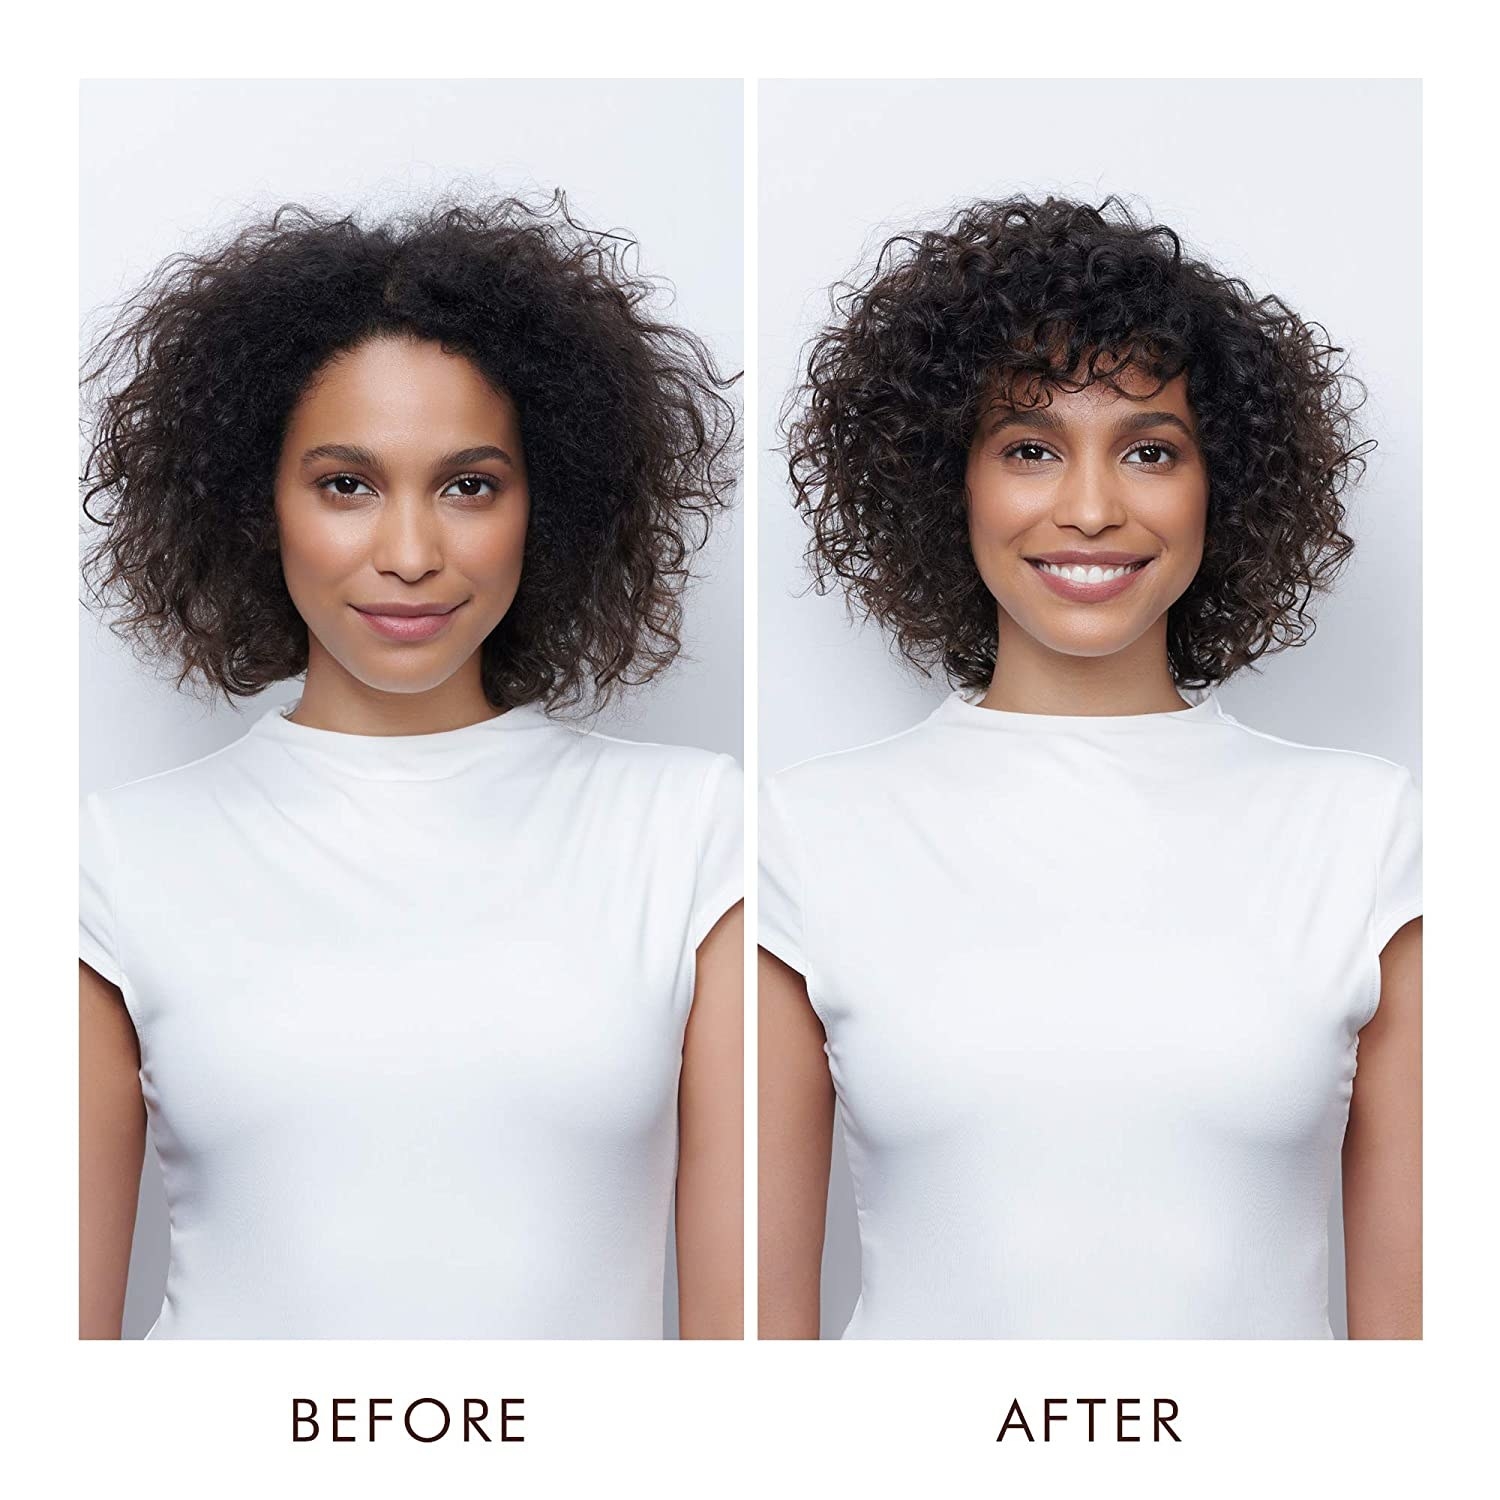 on left, model with undefined curls. on right, model with more shaped curls after using the curl cream above